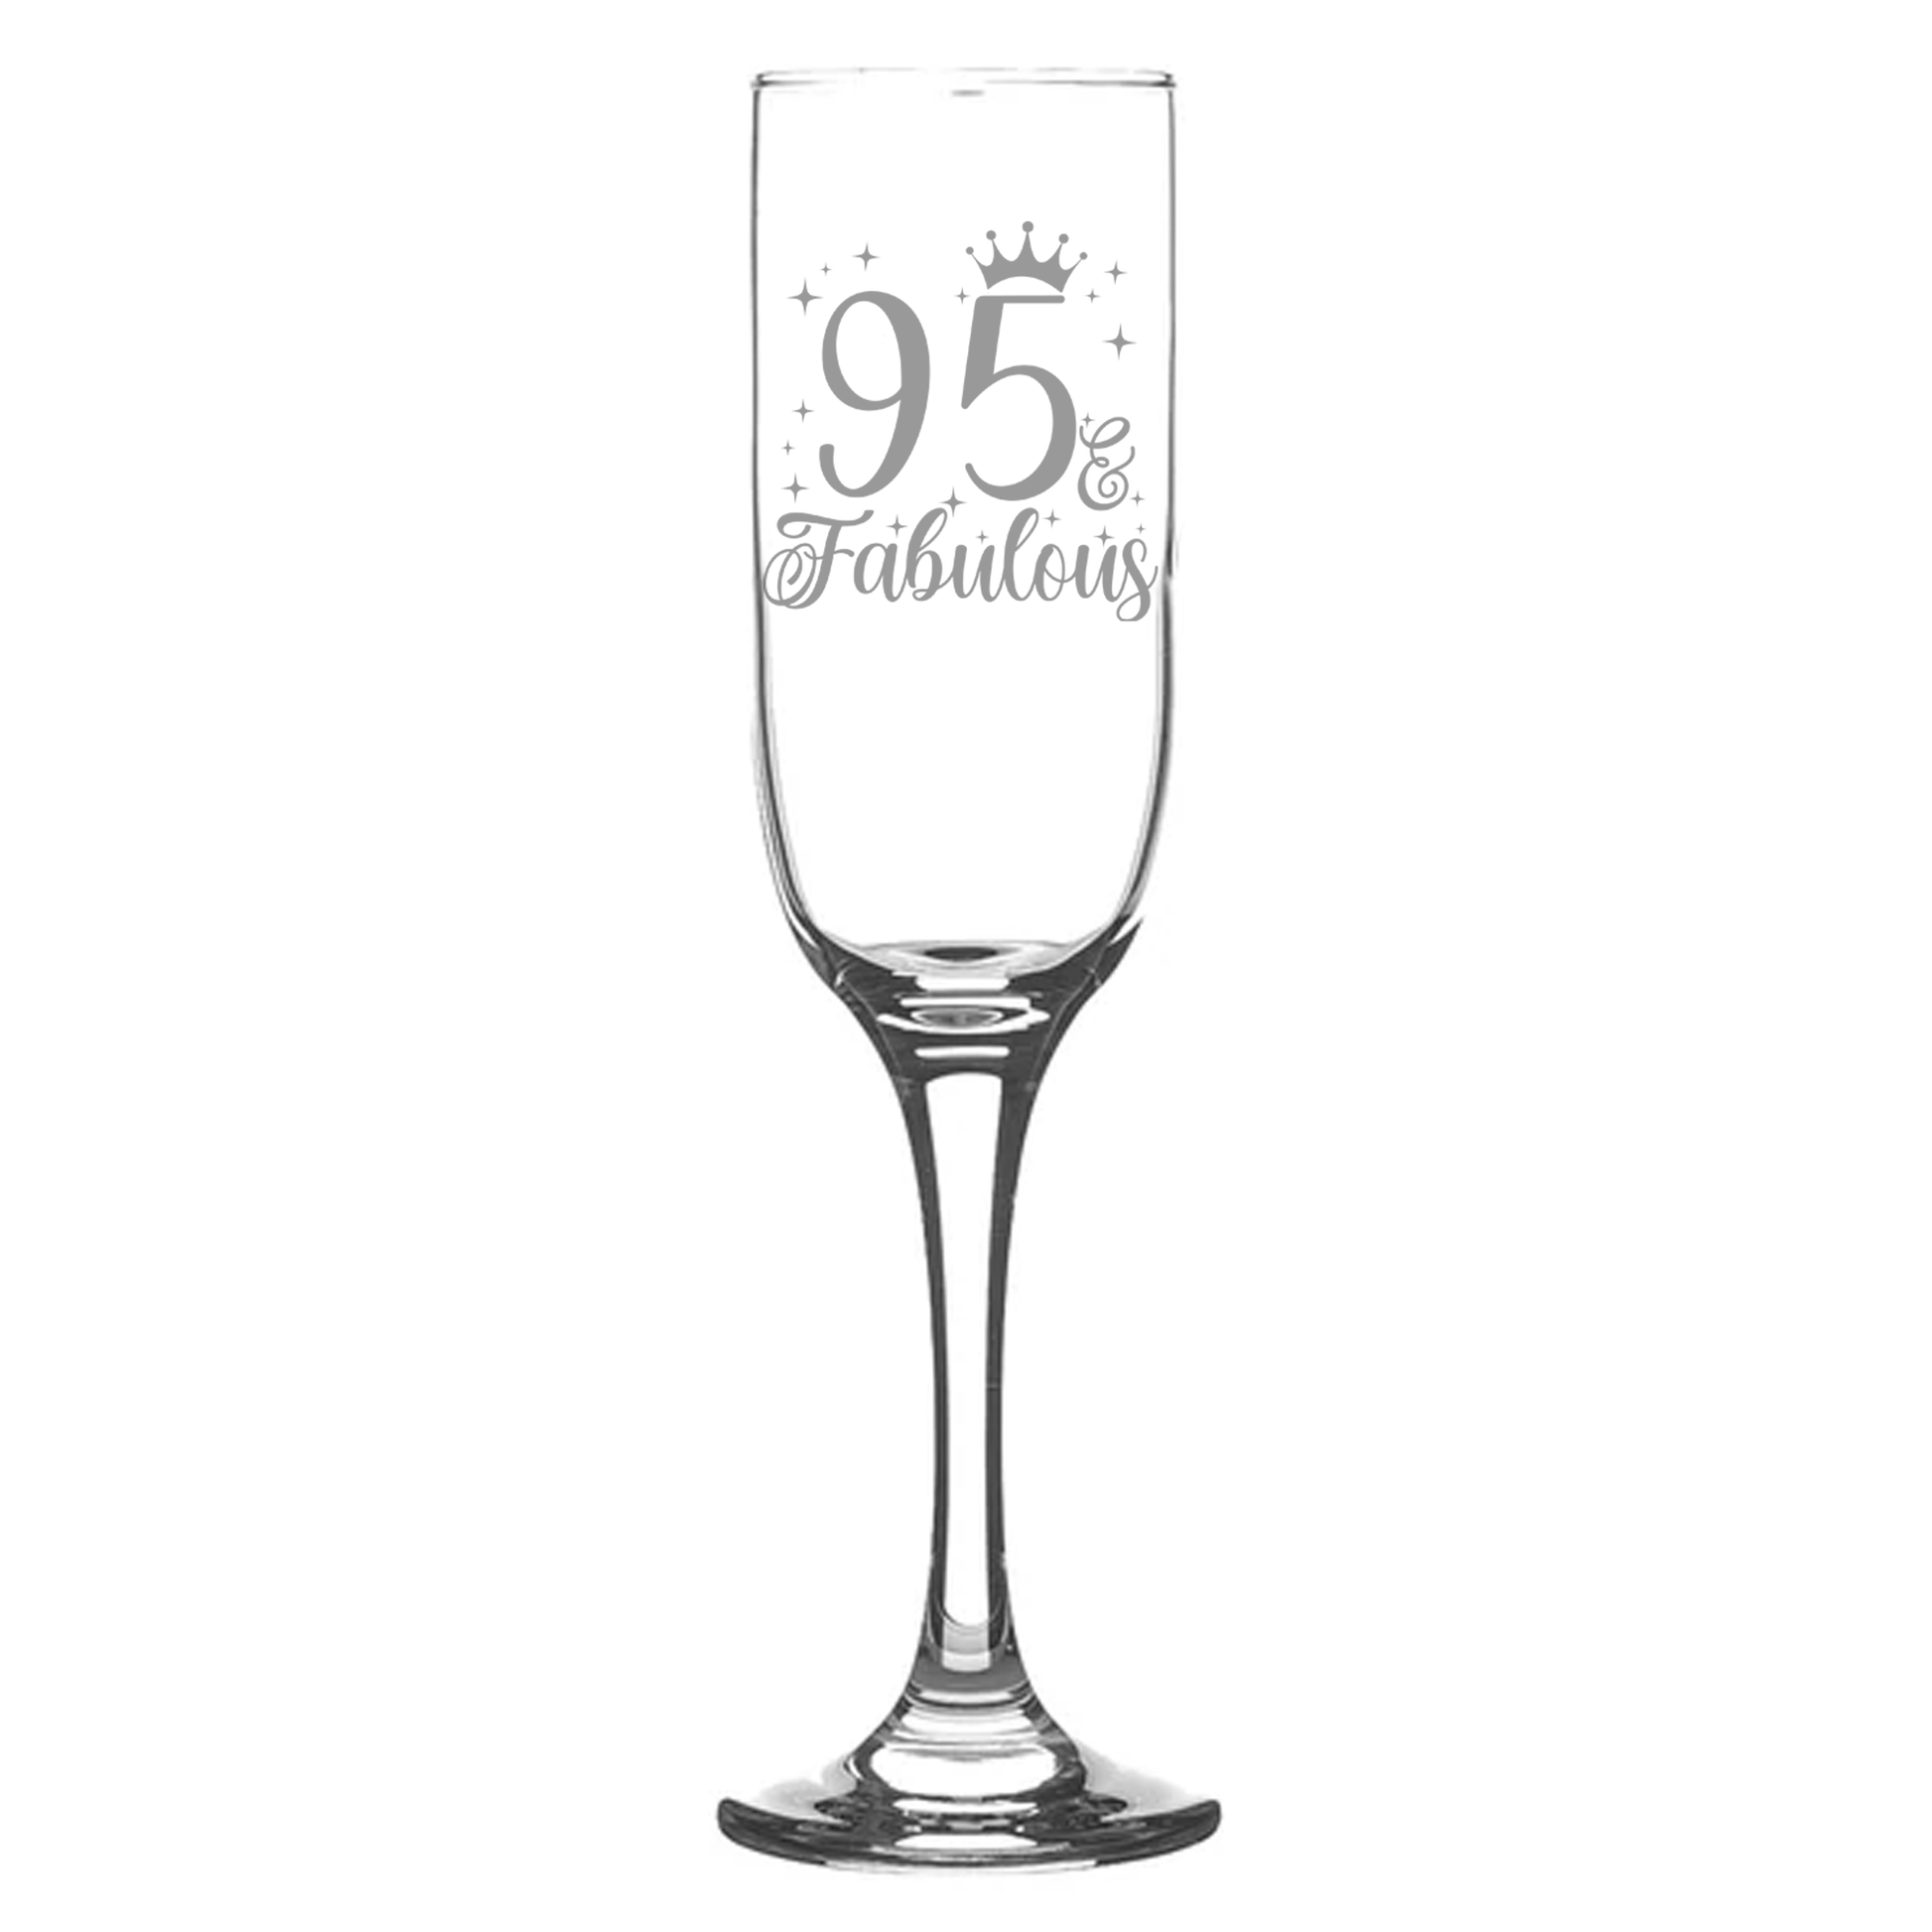 95 & Fabulous Engraved Champagne Glass and/or Coaster Set  - Always Looking Good - Champagne Glass On Its Own  